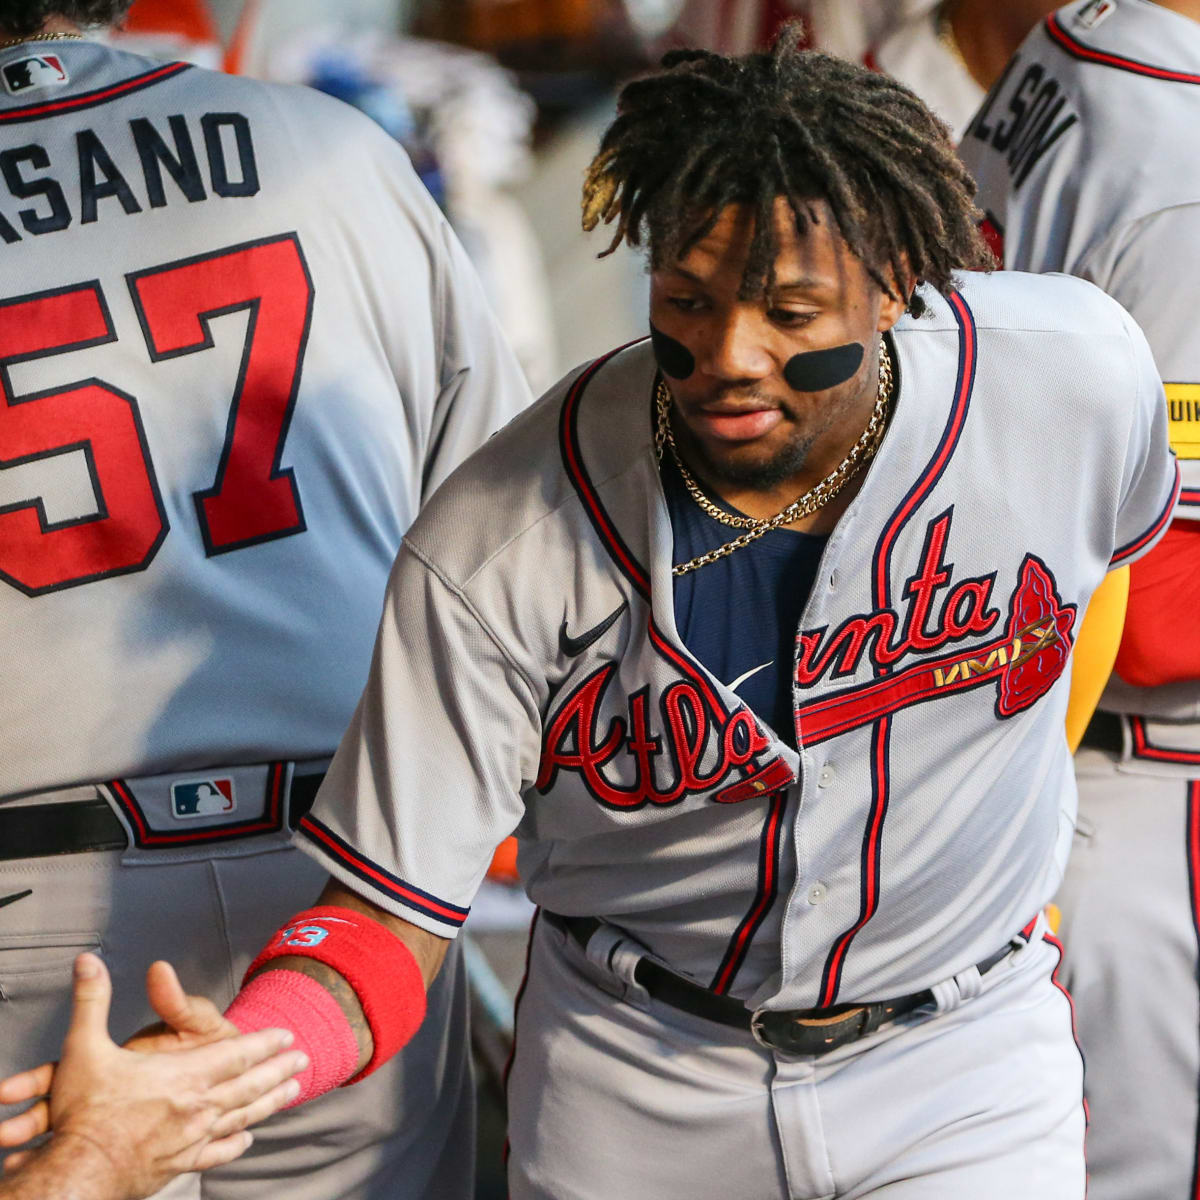 Ronald Acuna Jr. stats, explained: Inside the history of Braves star's 40  home run/70 steal season